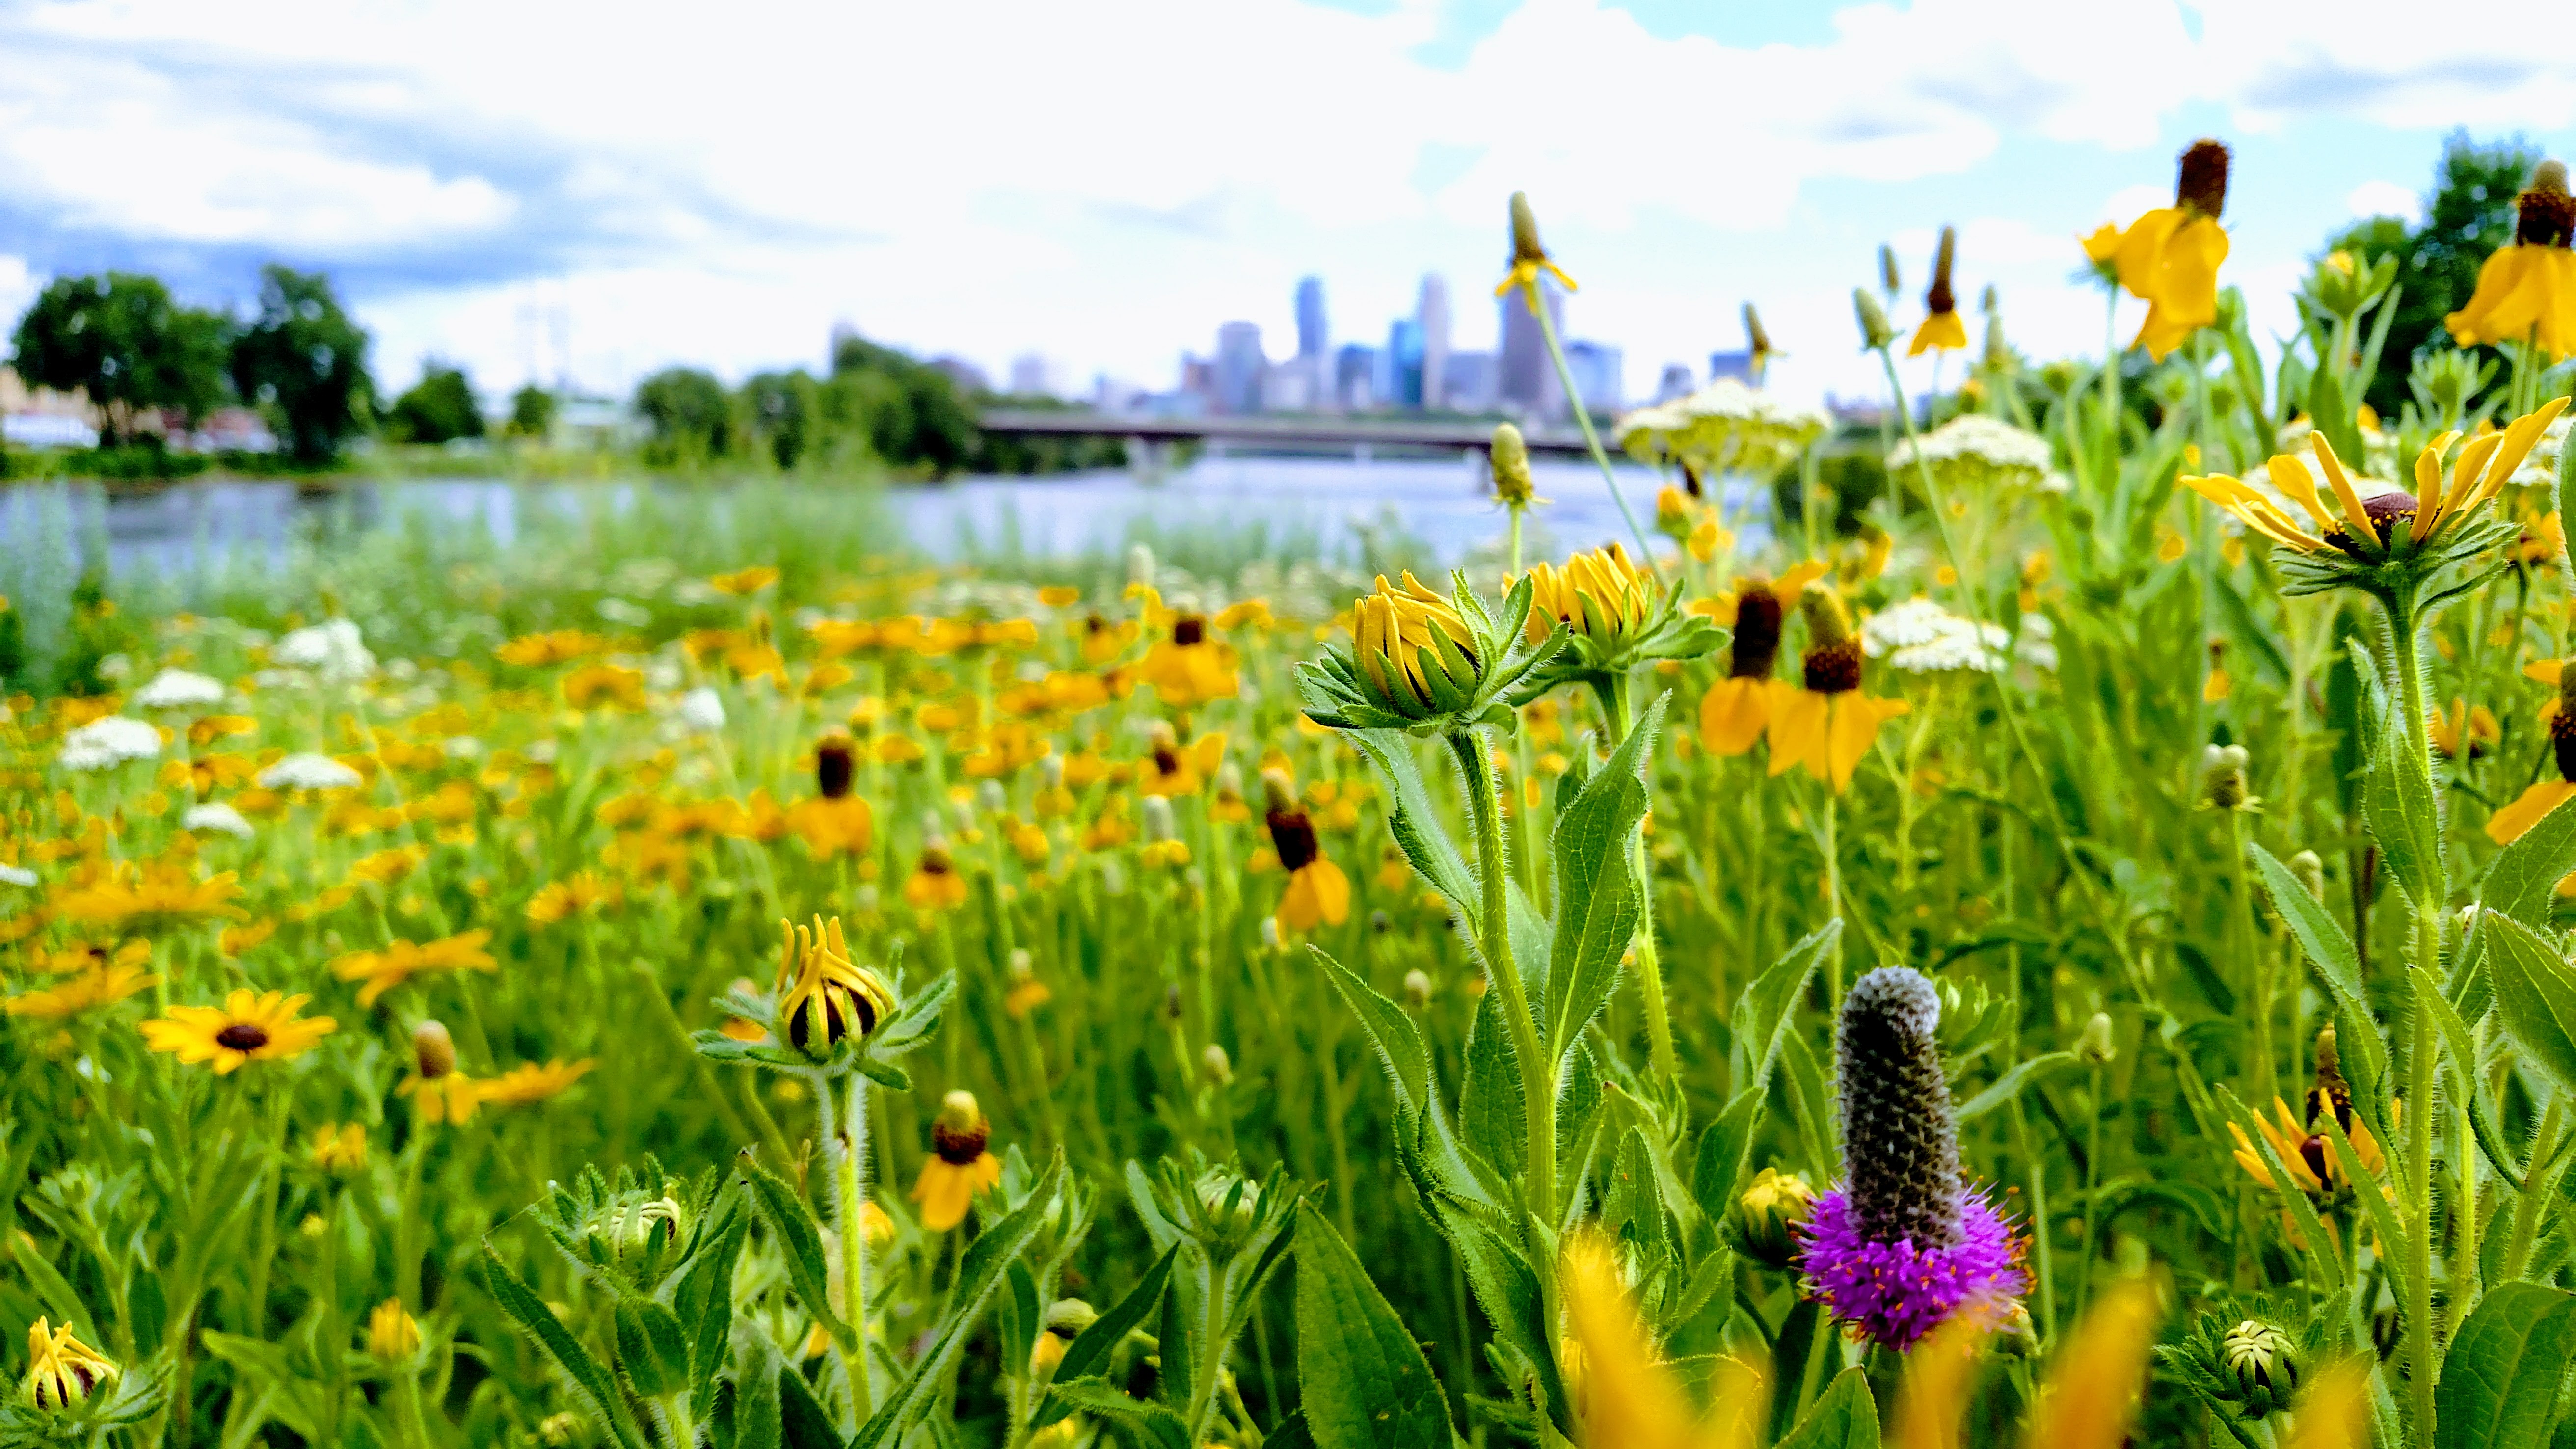 Blooming wildflowers with the Minneapolis skyline in the background